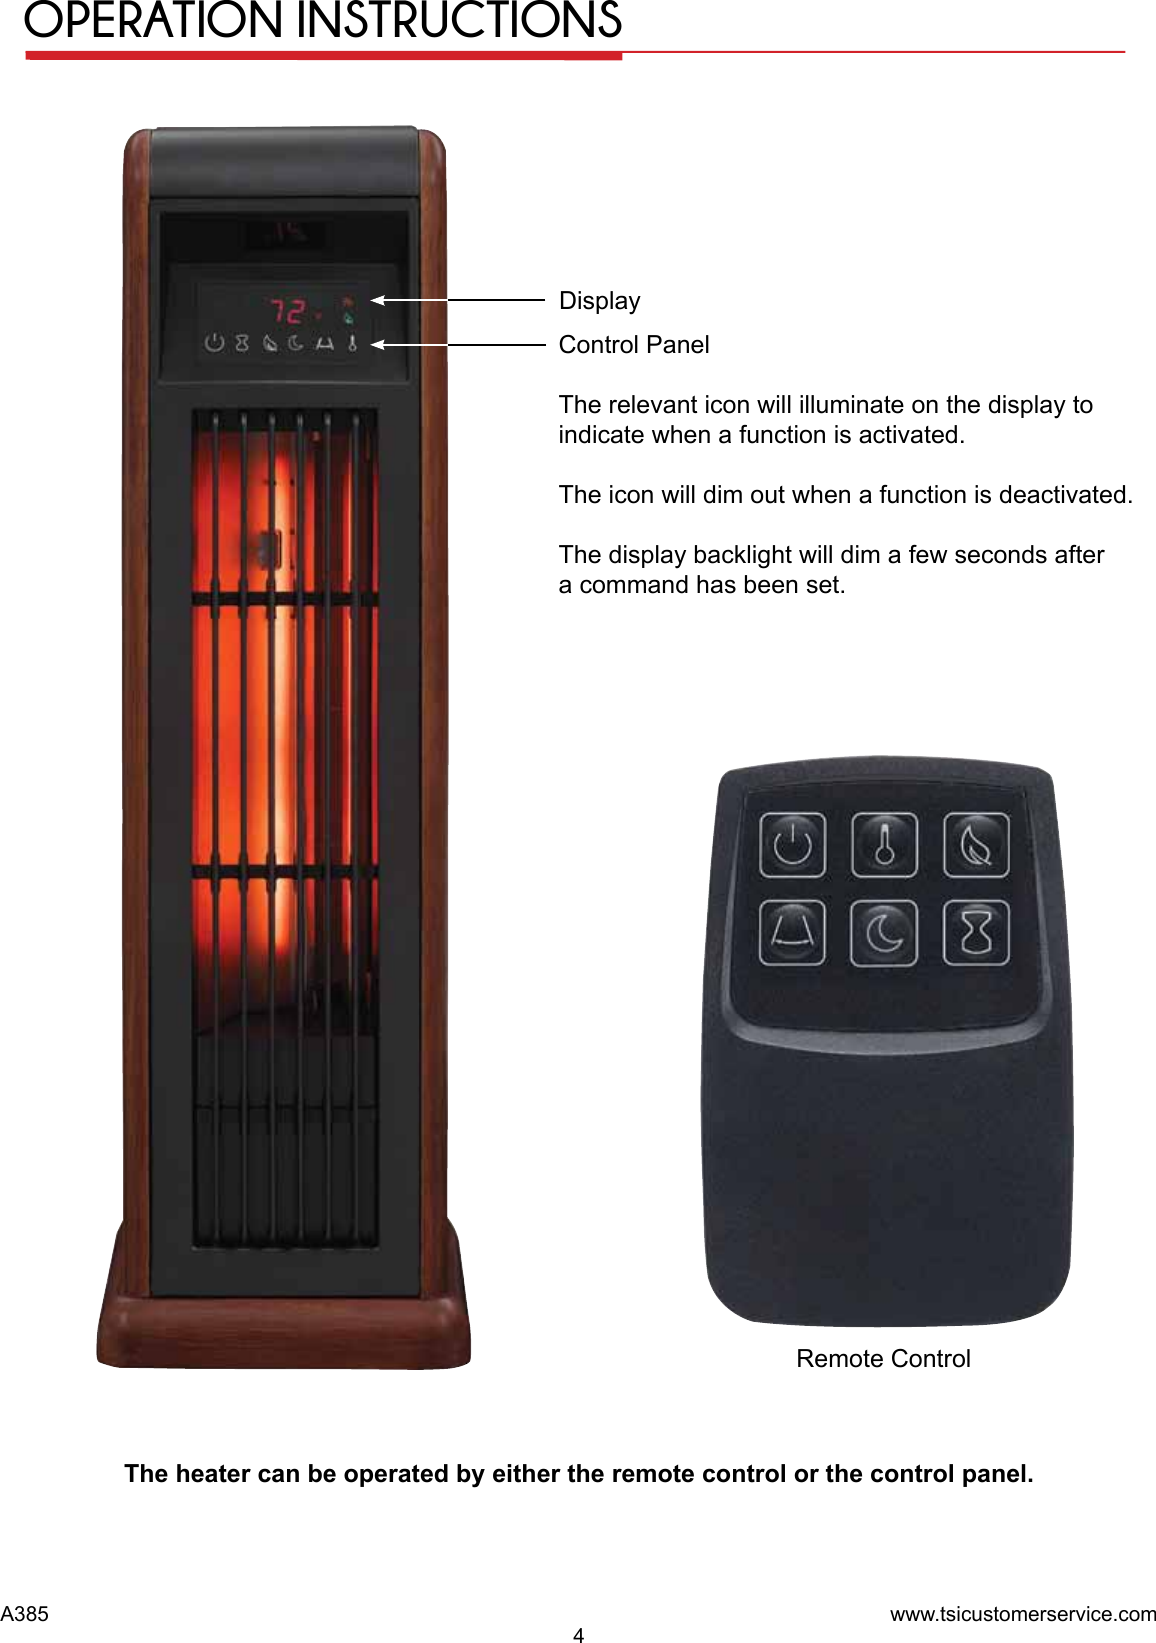 www.tsicustomerservice.comA3854DisplayThe heater can be operated by either the remote control or the control panel. Control PanelThe relevant icon will illuminate on the display to indicate when a function is activated. The icon will dim out when a function is deactivated.The display backlight will dim a few seconds after a command has been set.Remote ControlOPERATION INSTRUCTIONS